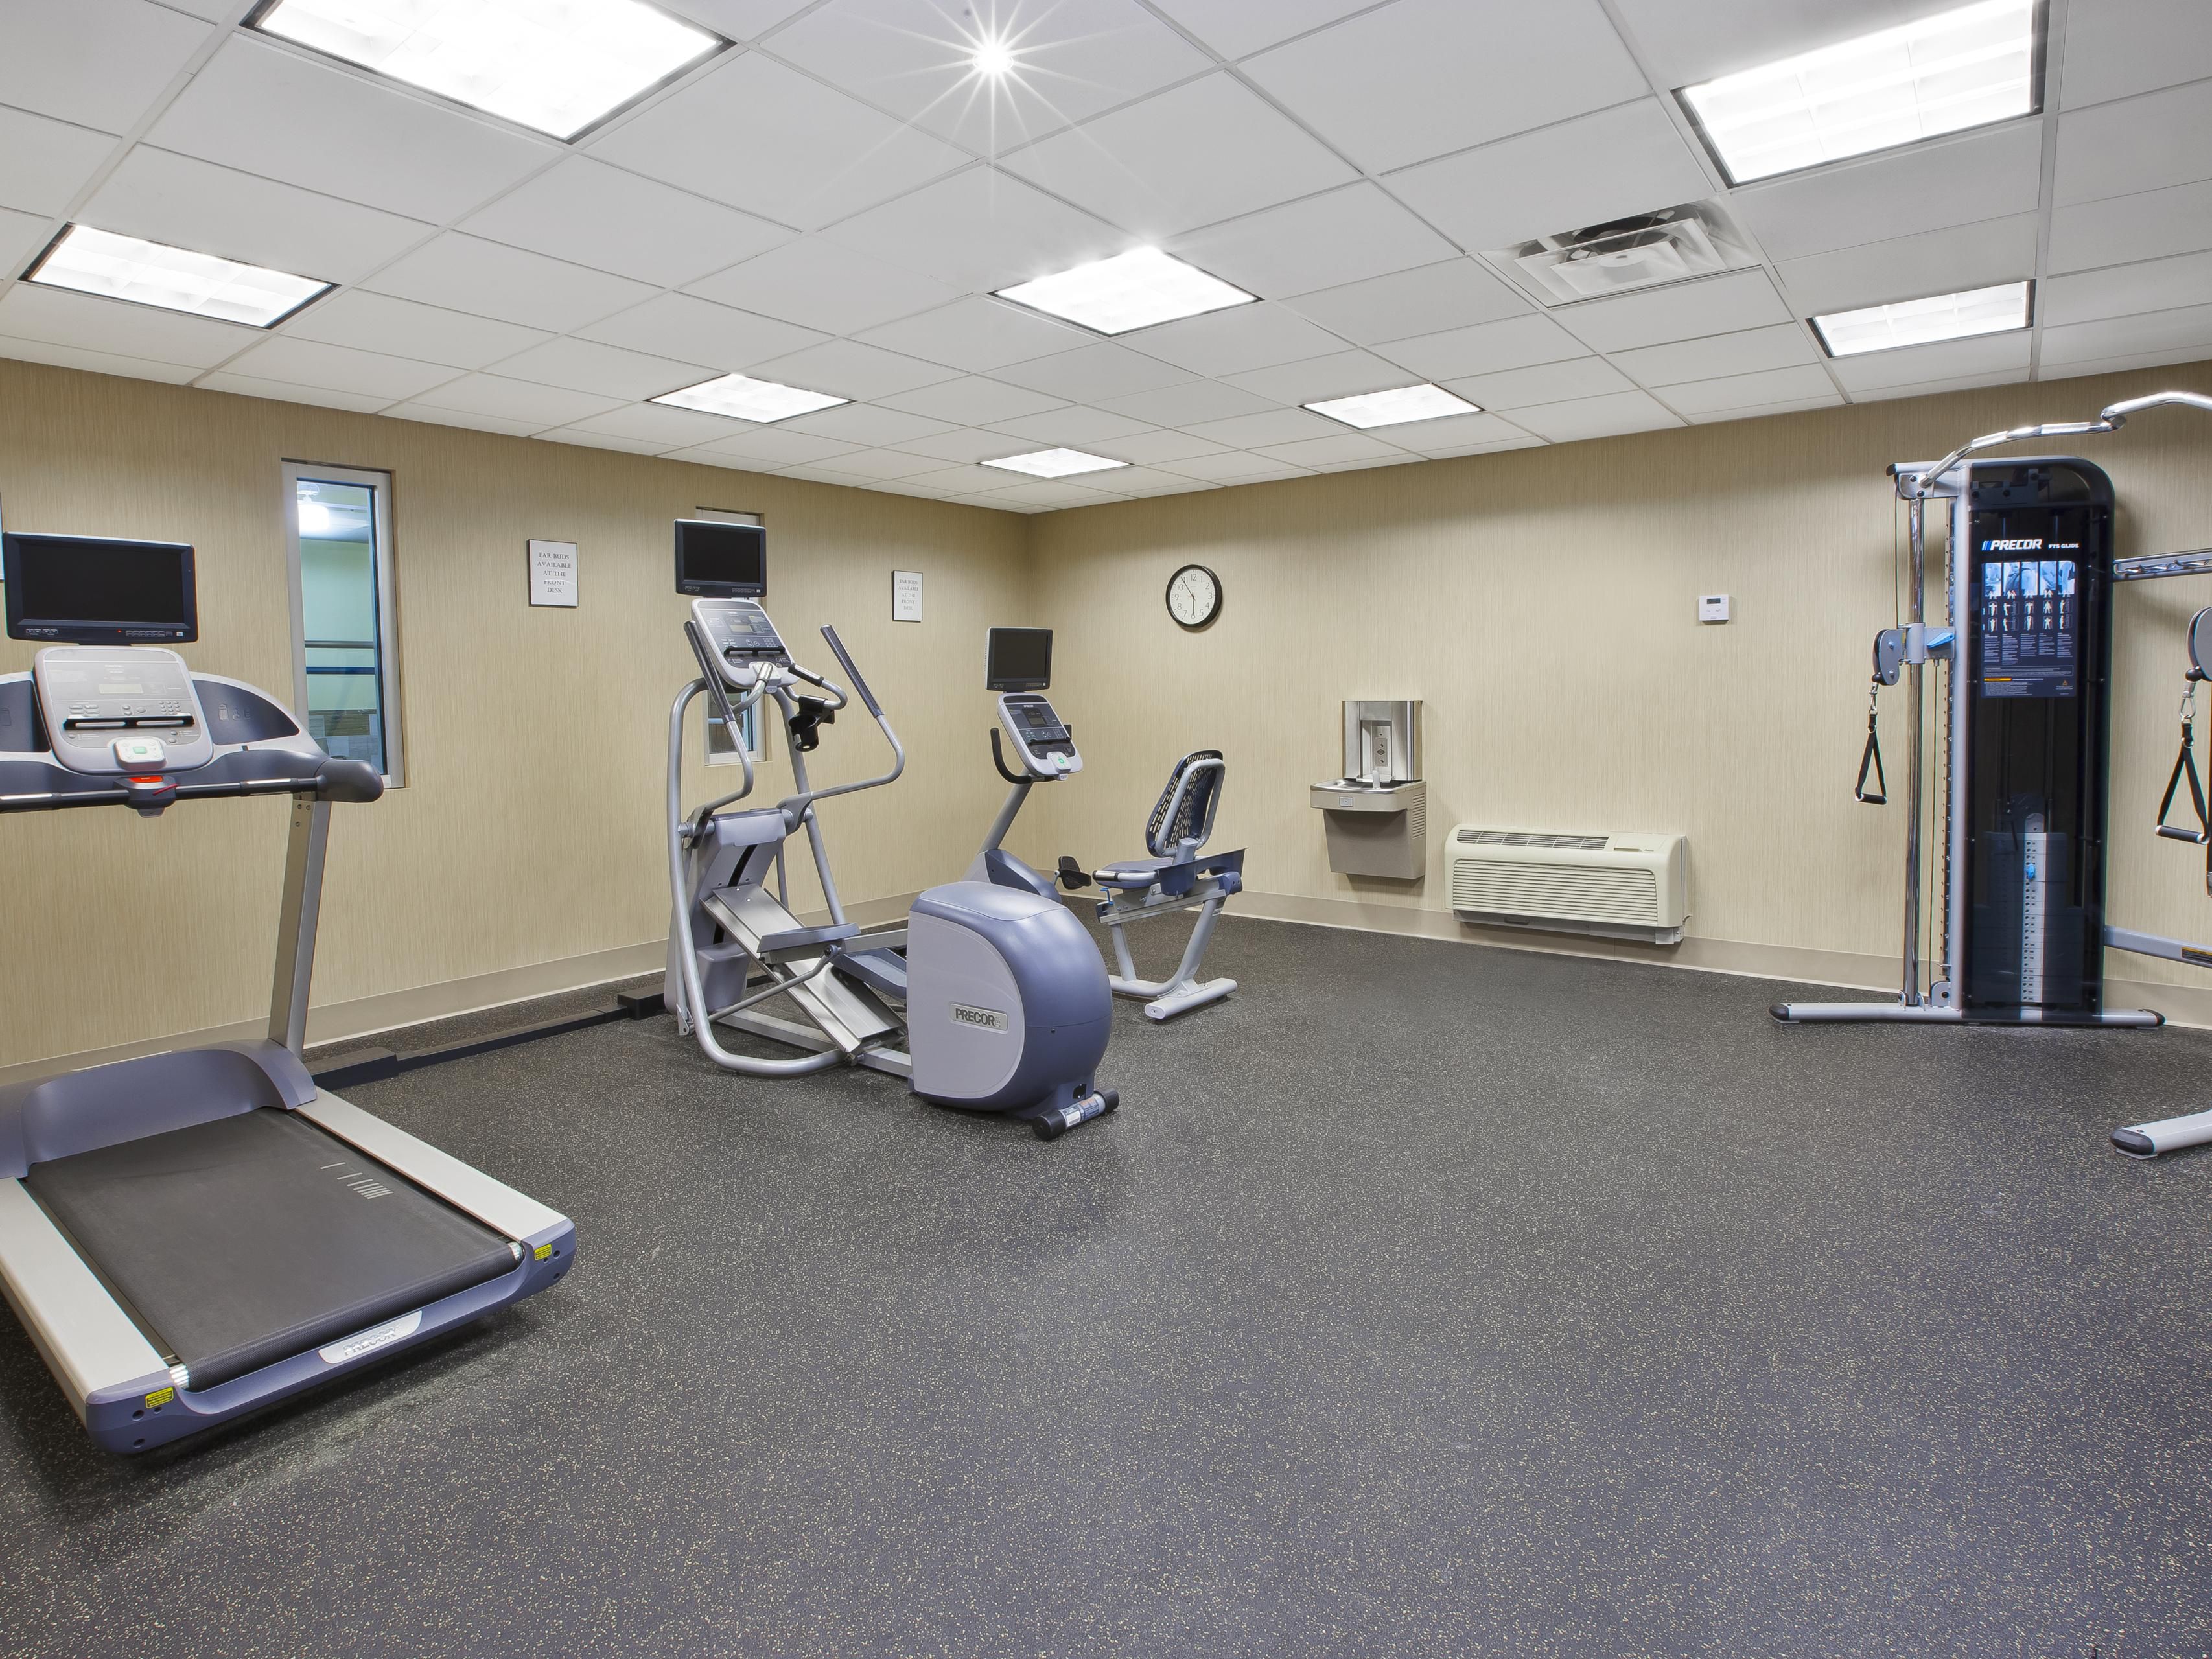 Get your sweat on in our complimentary, fully equipped Fitness Center- open 7:00 AM to 10:00 PM daily.